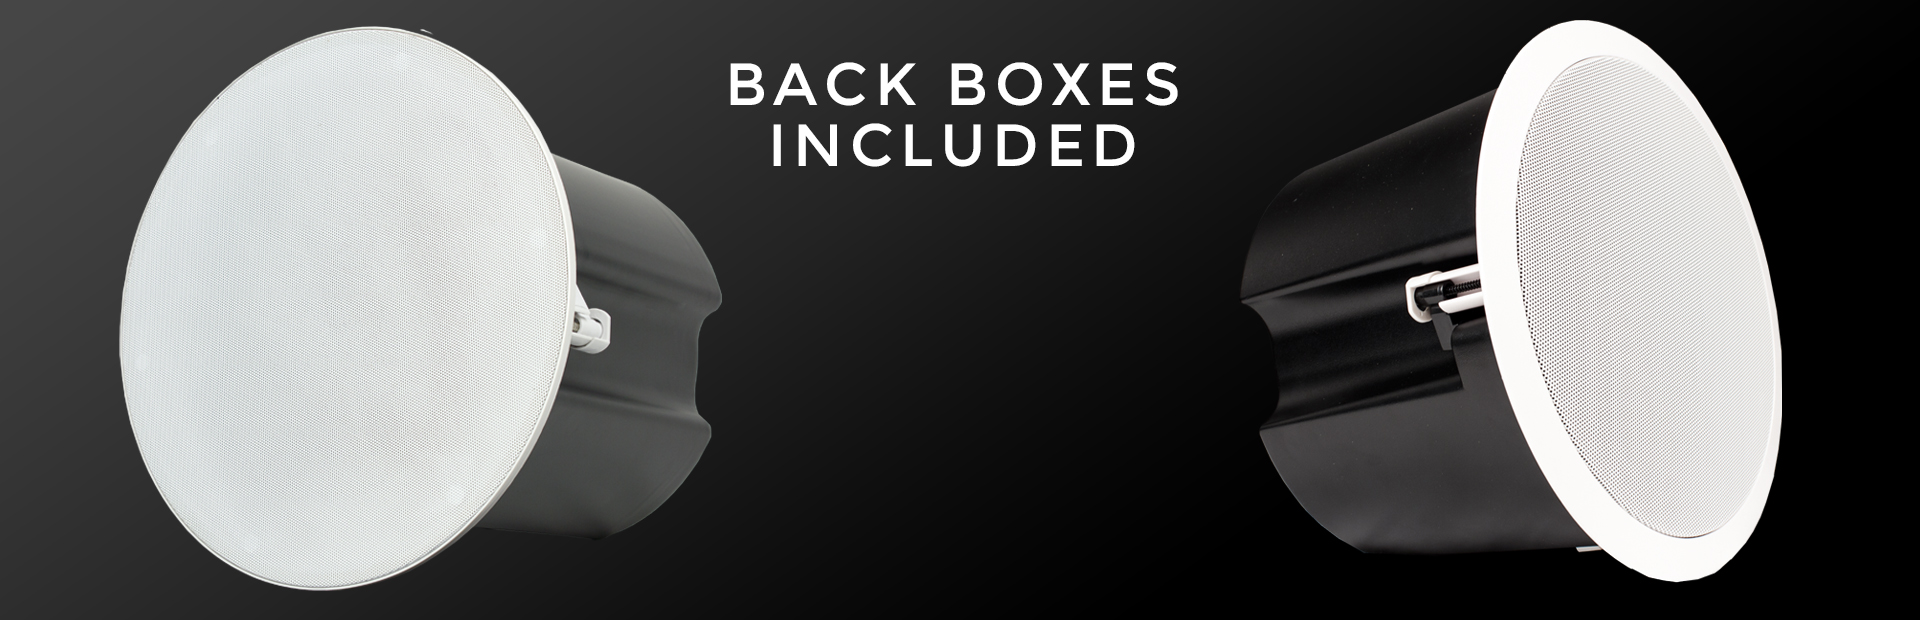 Backboxes included